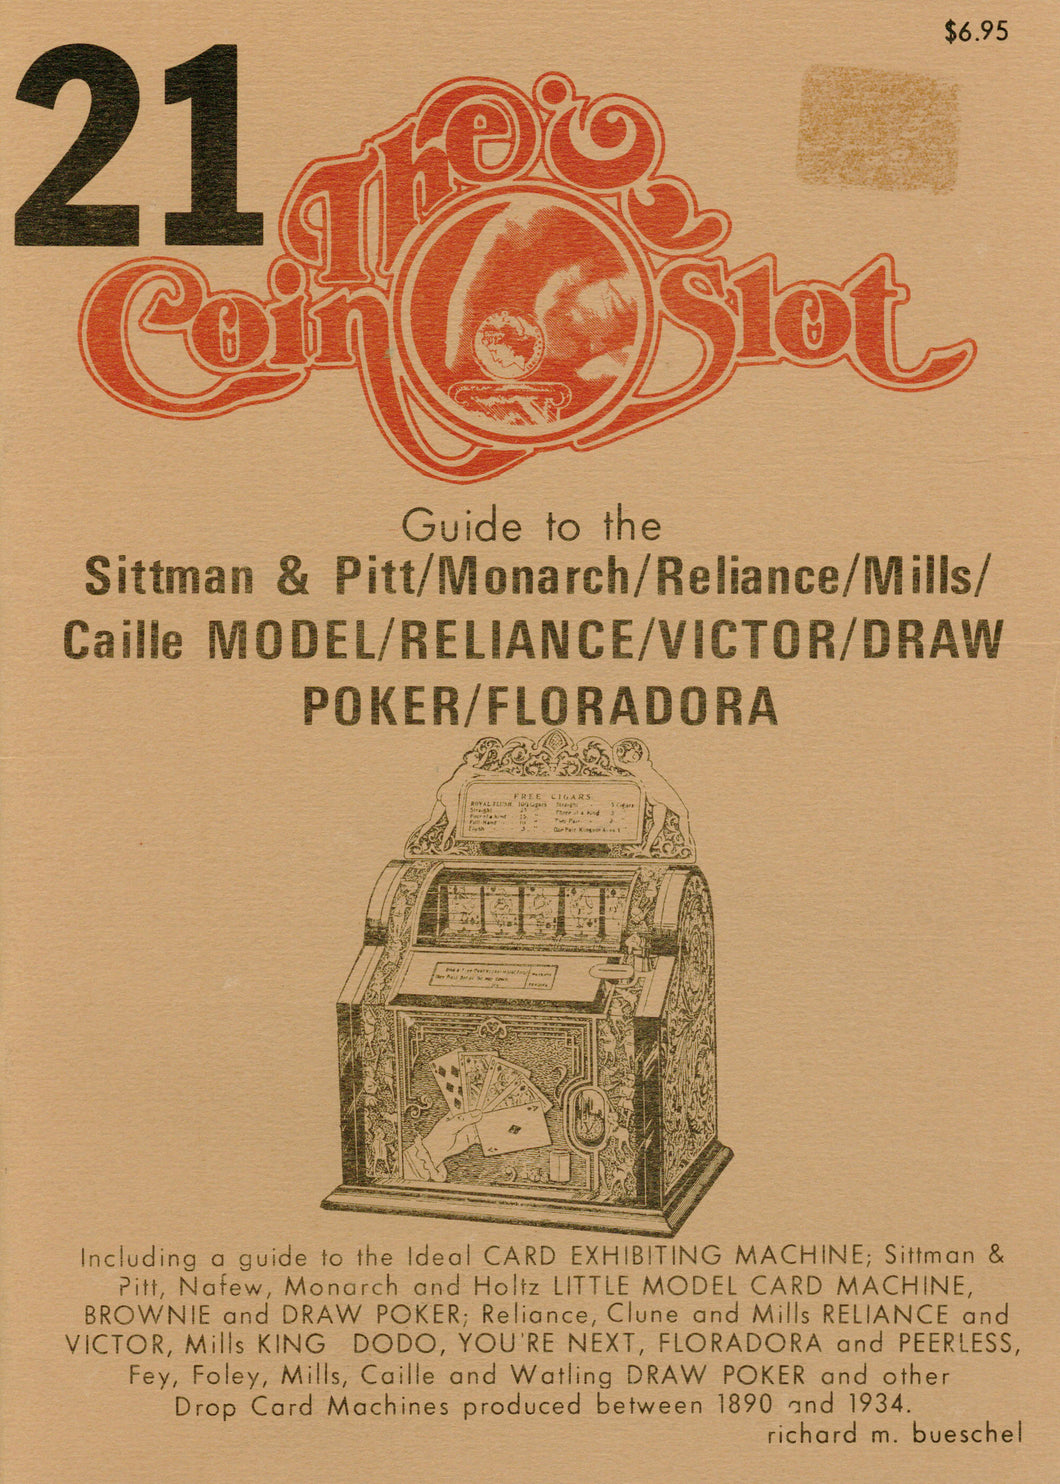 Coin Slot #21. Guide to the Sittman & Pitt/Monarch/Reliance/Mills/Caille Model/Reliance/Victor/Draw Poker/Floradora